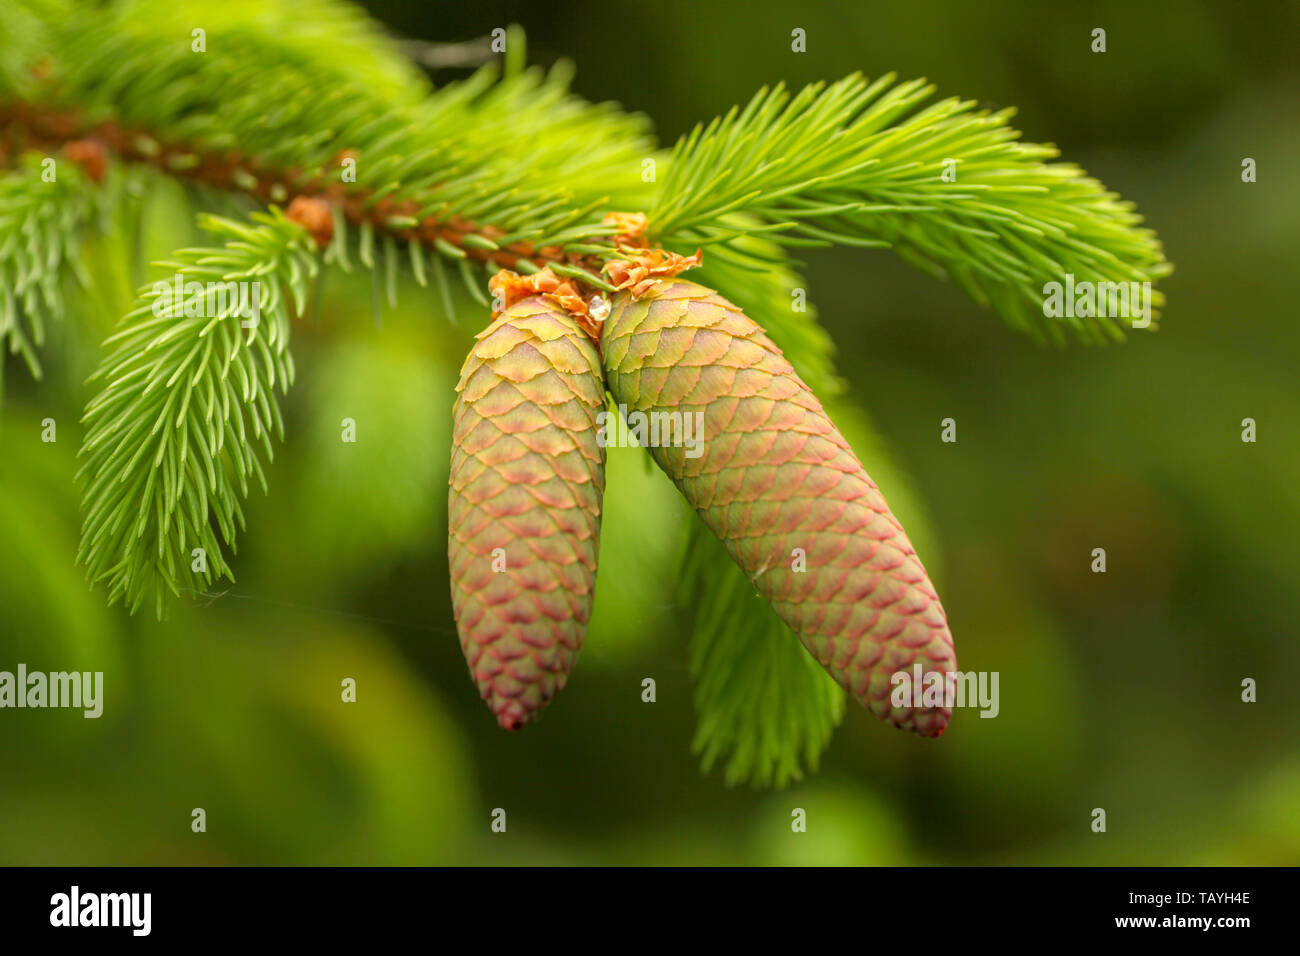 Young red spruce pine cone on the green branches with green background Stock Photo